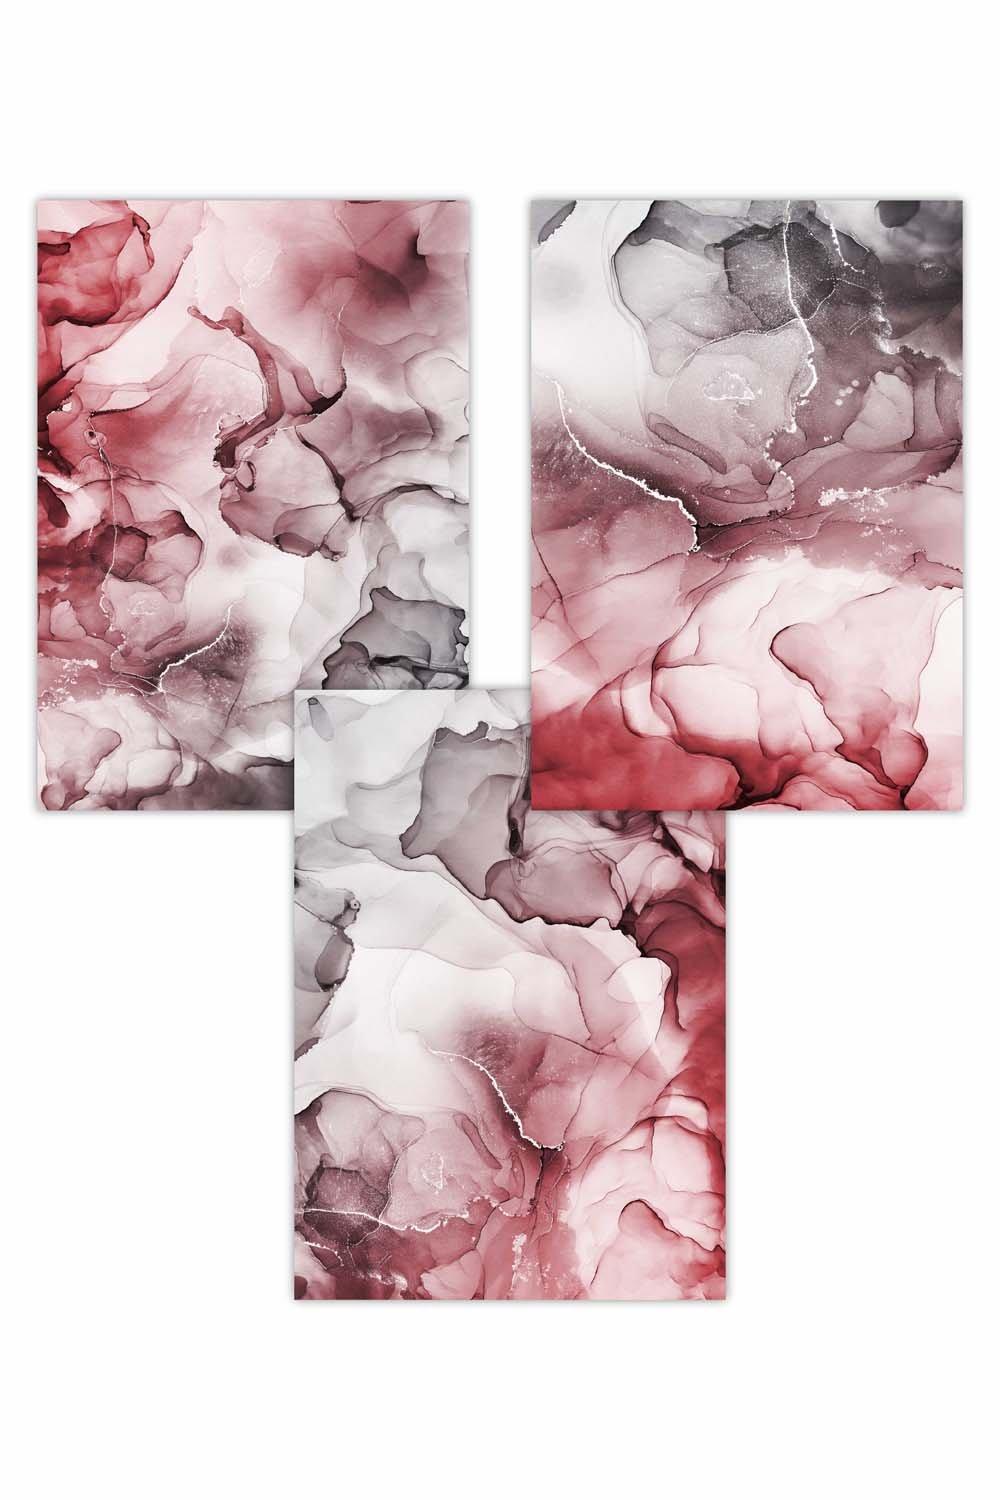 Set of 3 Abstract Floral Fluid in Red and Grey Art Posters